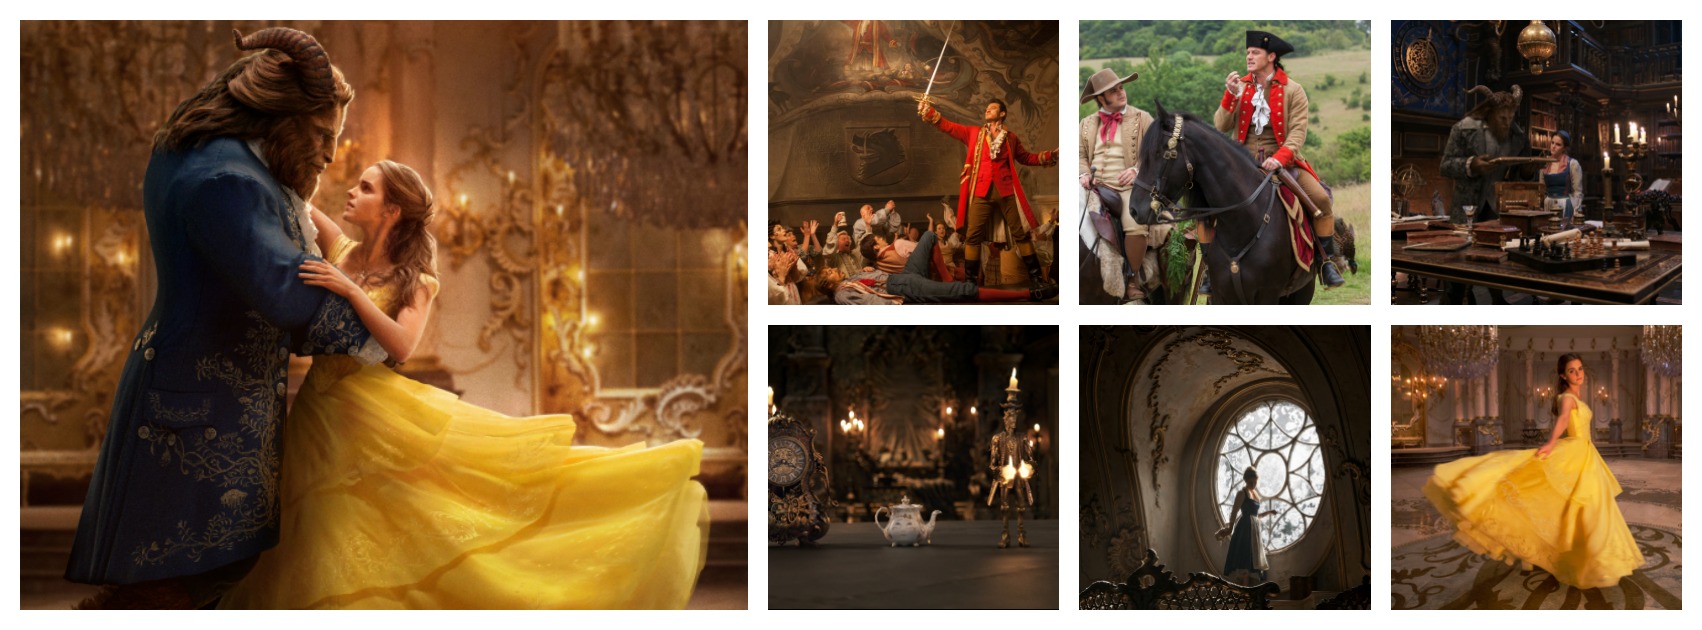 Brand NEW Images from Disney's Beauty and the Beast #BeOurGuest #BeautyAndTheBeast